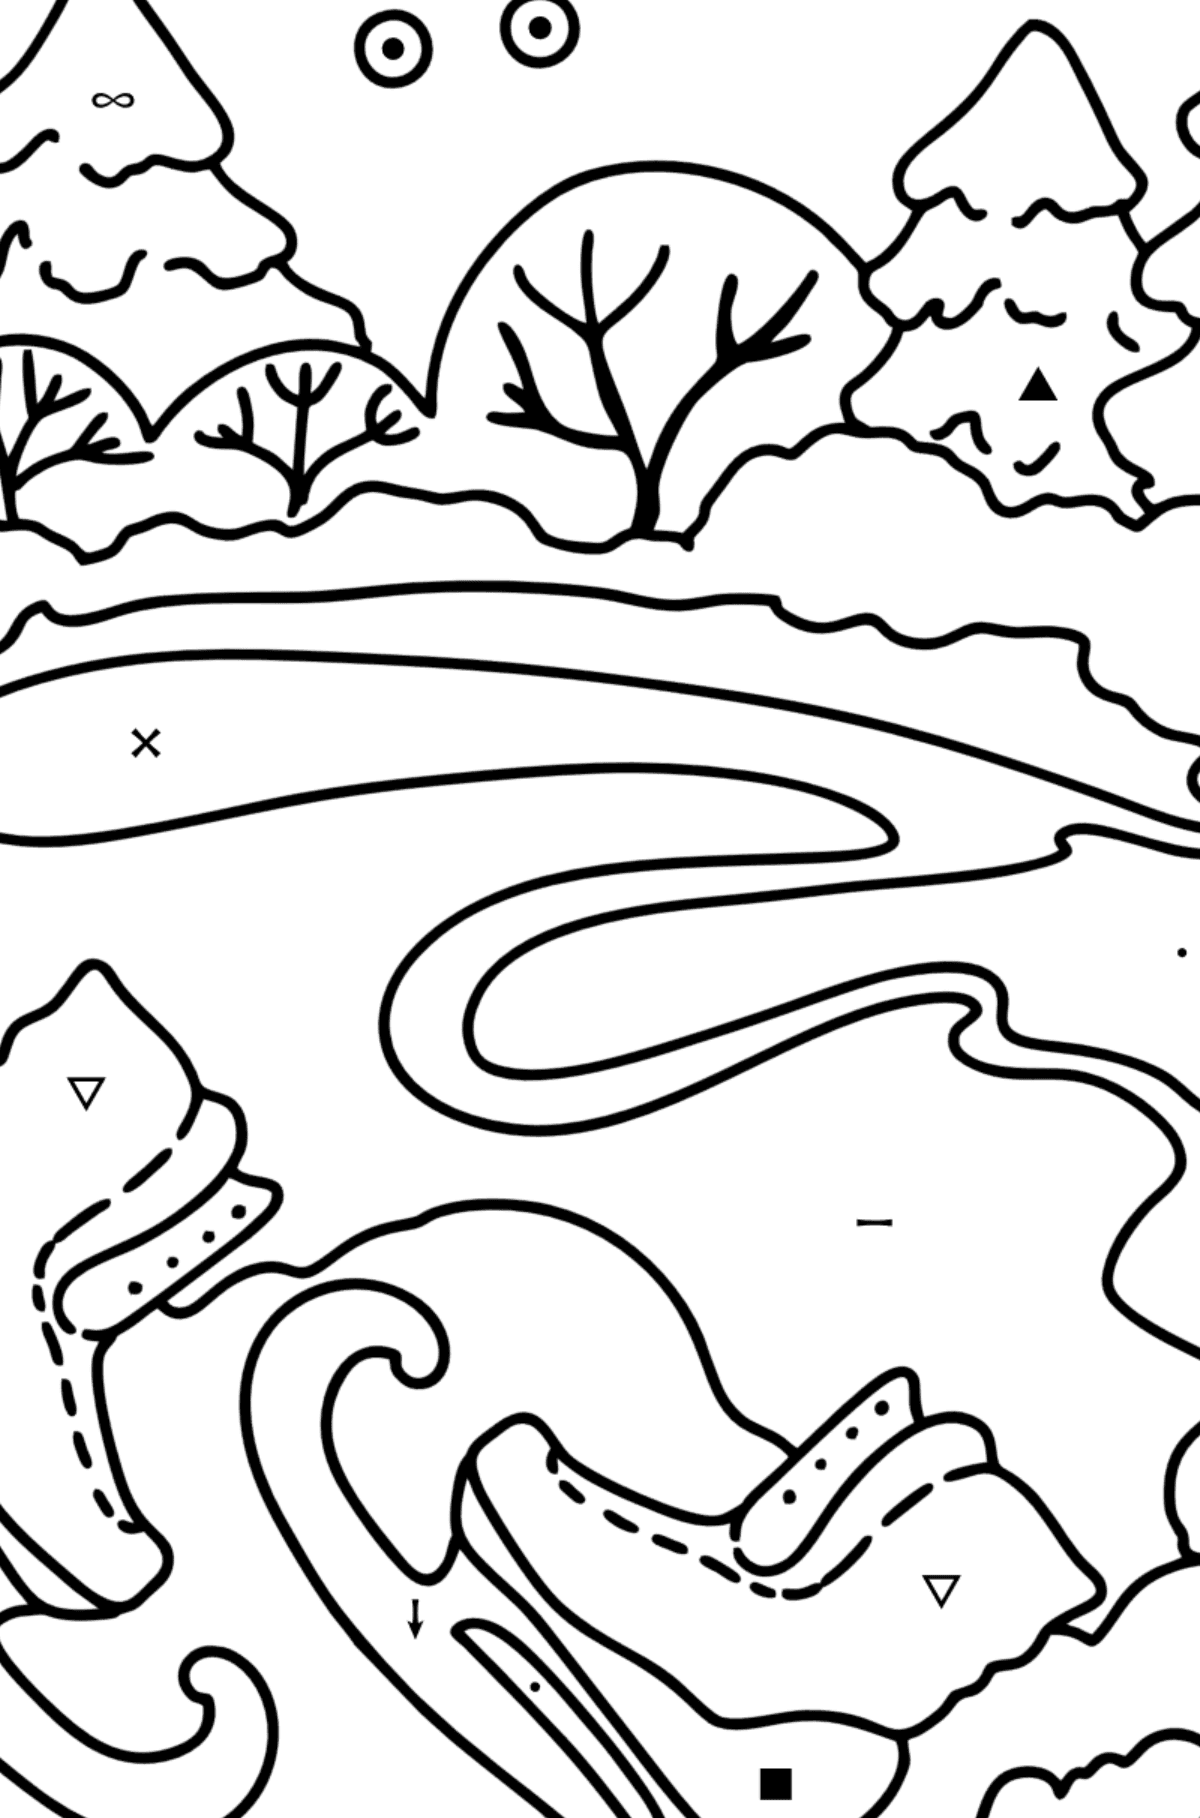 Coloring page - Winter and skates - Coloring by Symbols for Kids